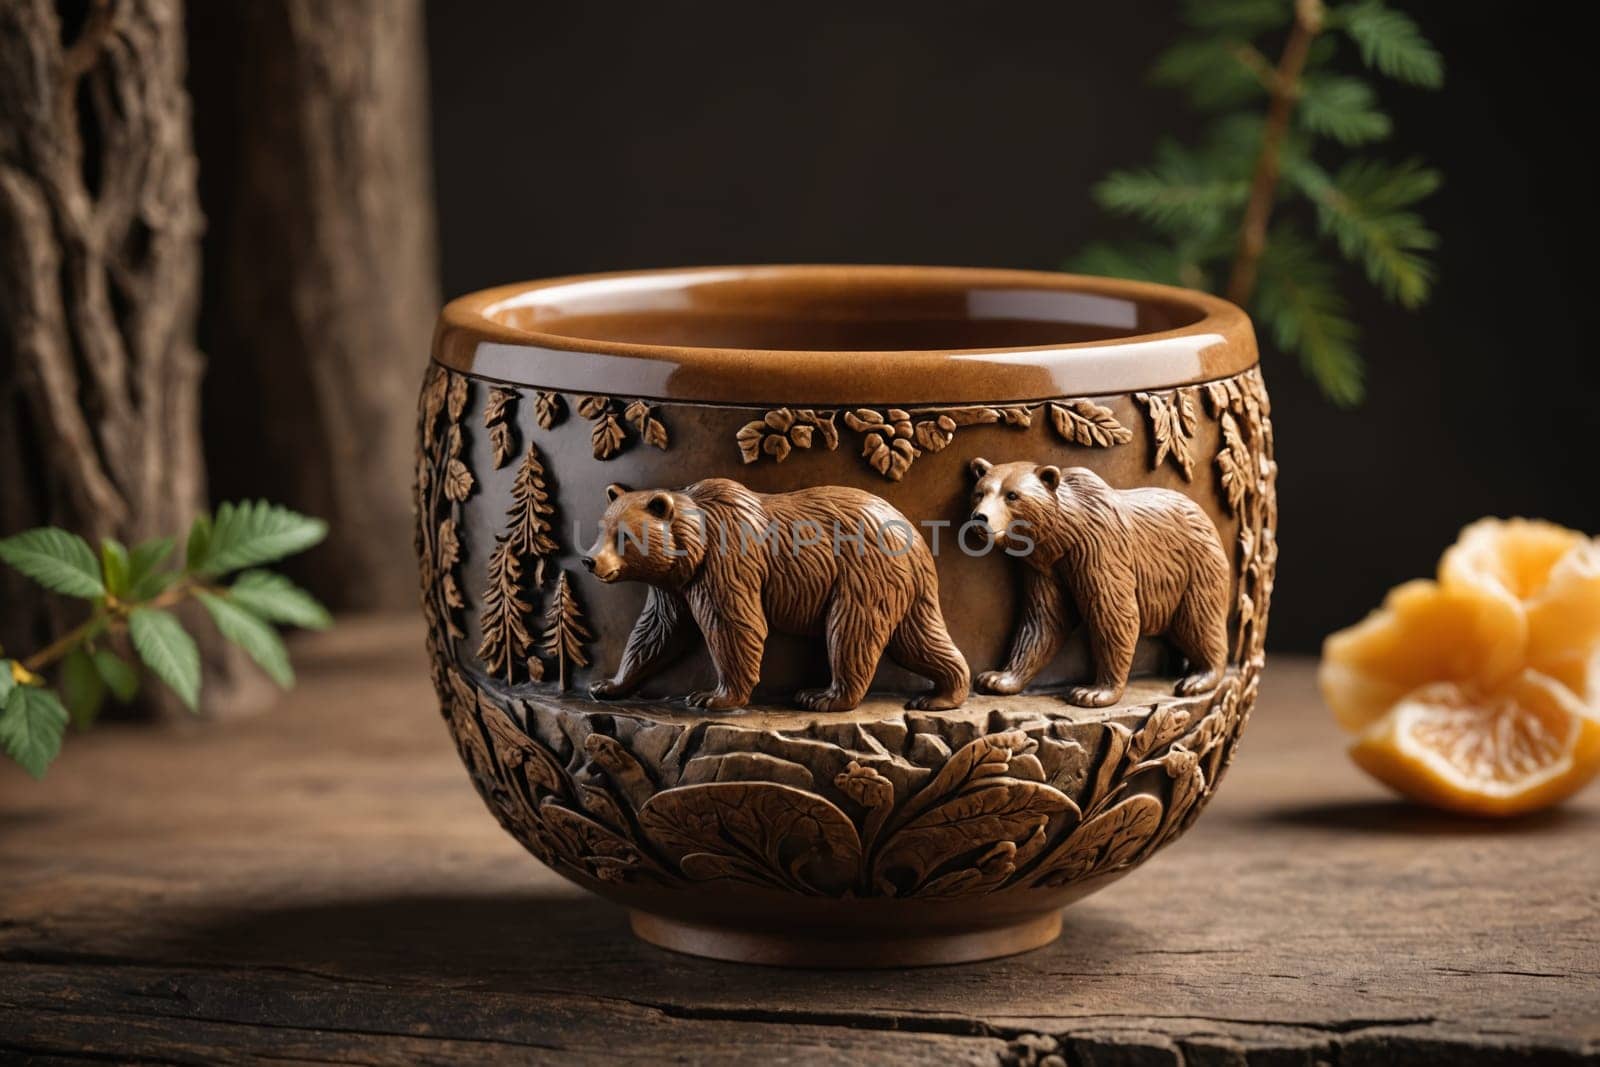 For the nature lover: a rustic mug with intricate bear and landscape detailing, perfect for cabin vibes.